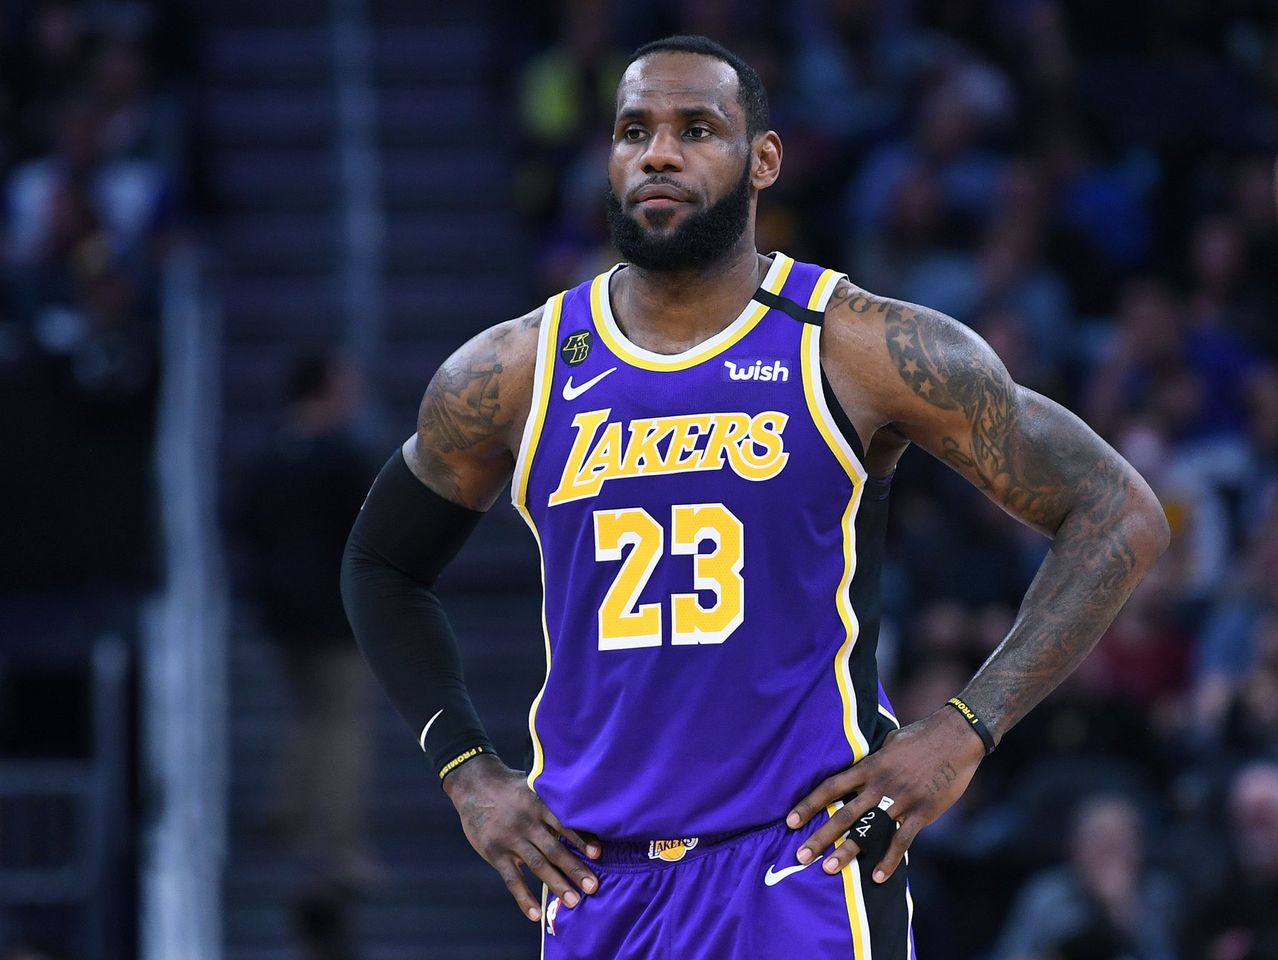 LeBron James #23 of the Los Angeles Lakers looks on against the Golden State Warriors during an NBA basketball game on February 08, 2020. | Source: Getty Images